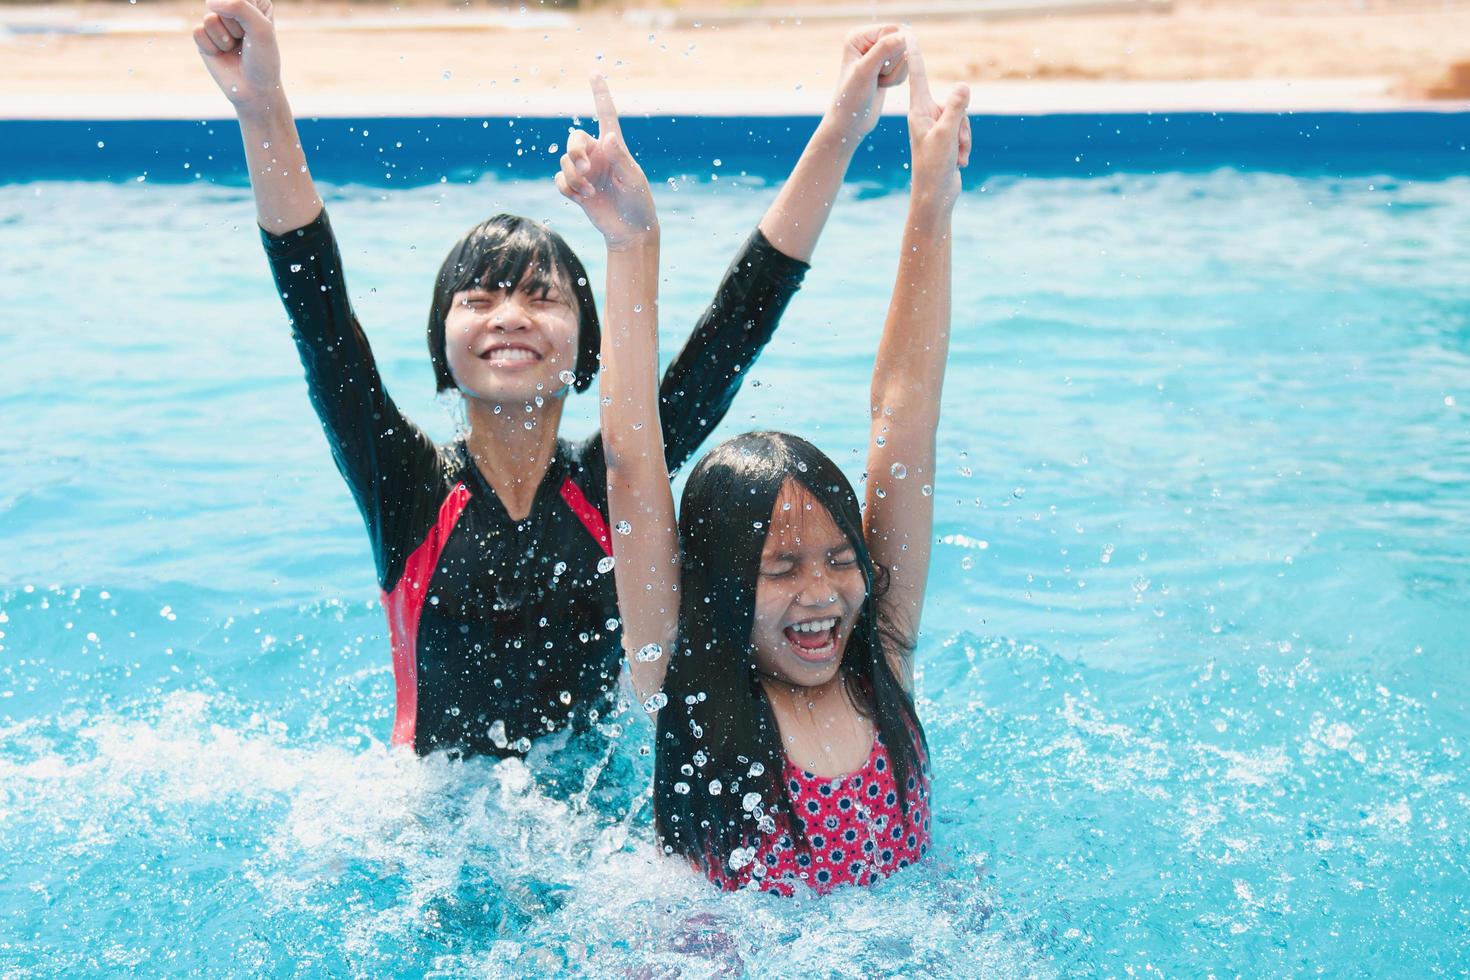 children swiming and playing in the pool with happy smile photo